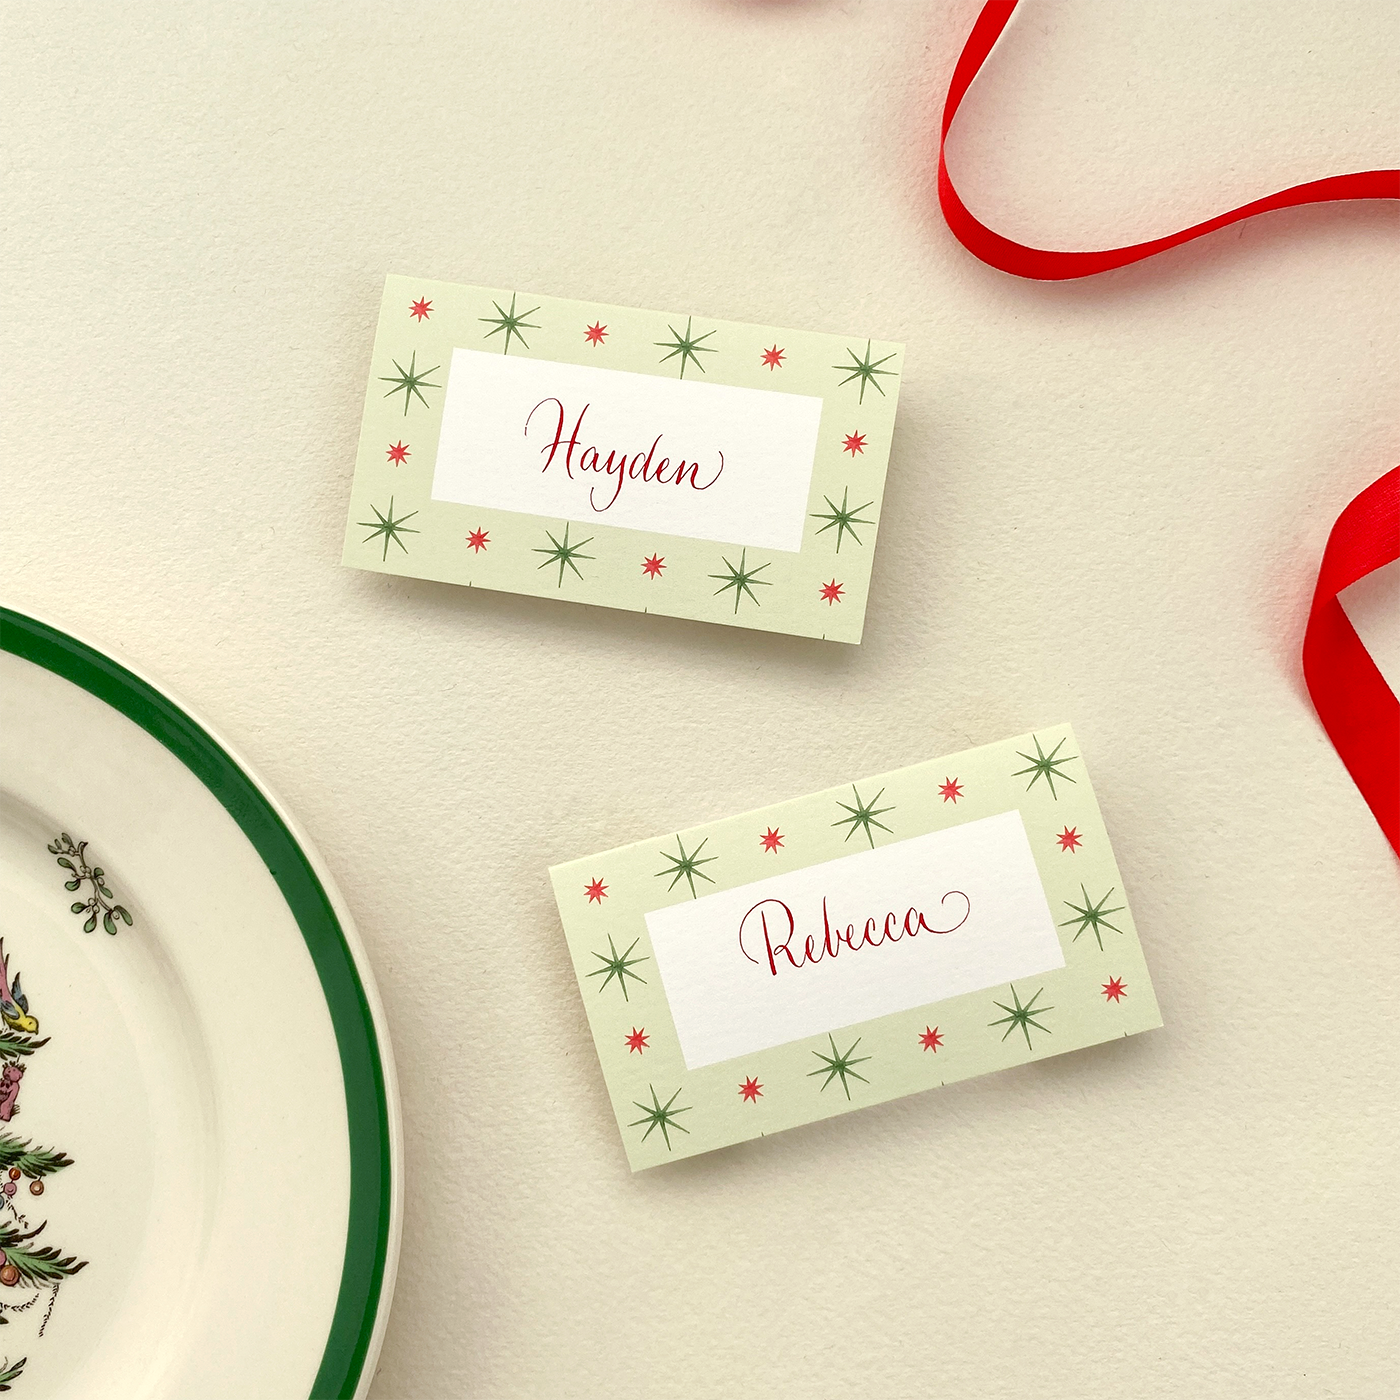 Red and Green Starburst Place Cards with Calligraphy